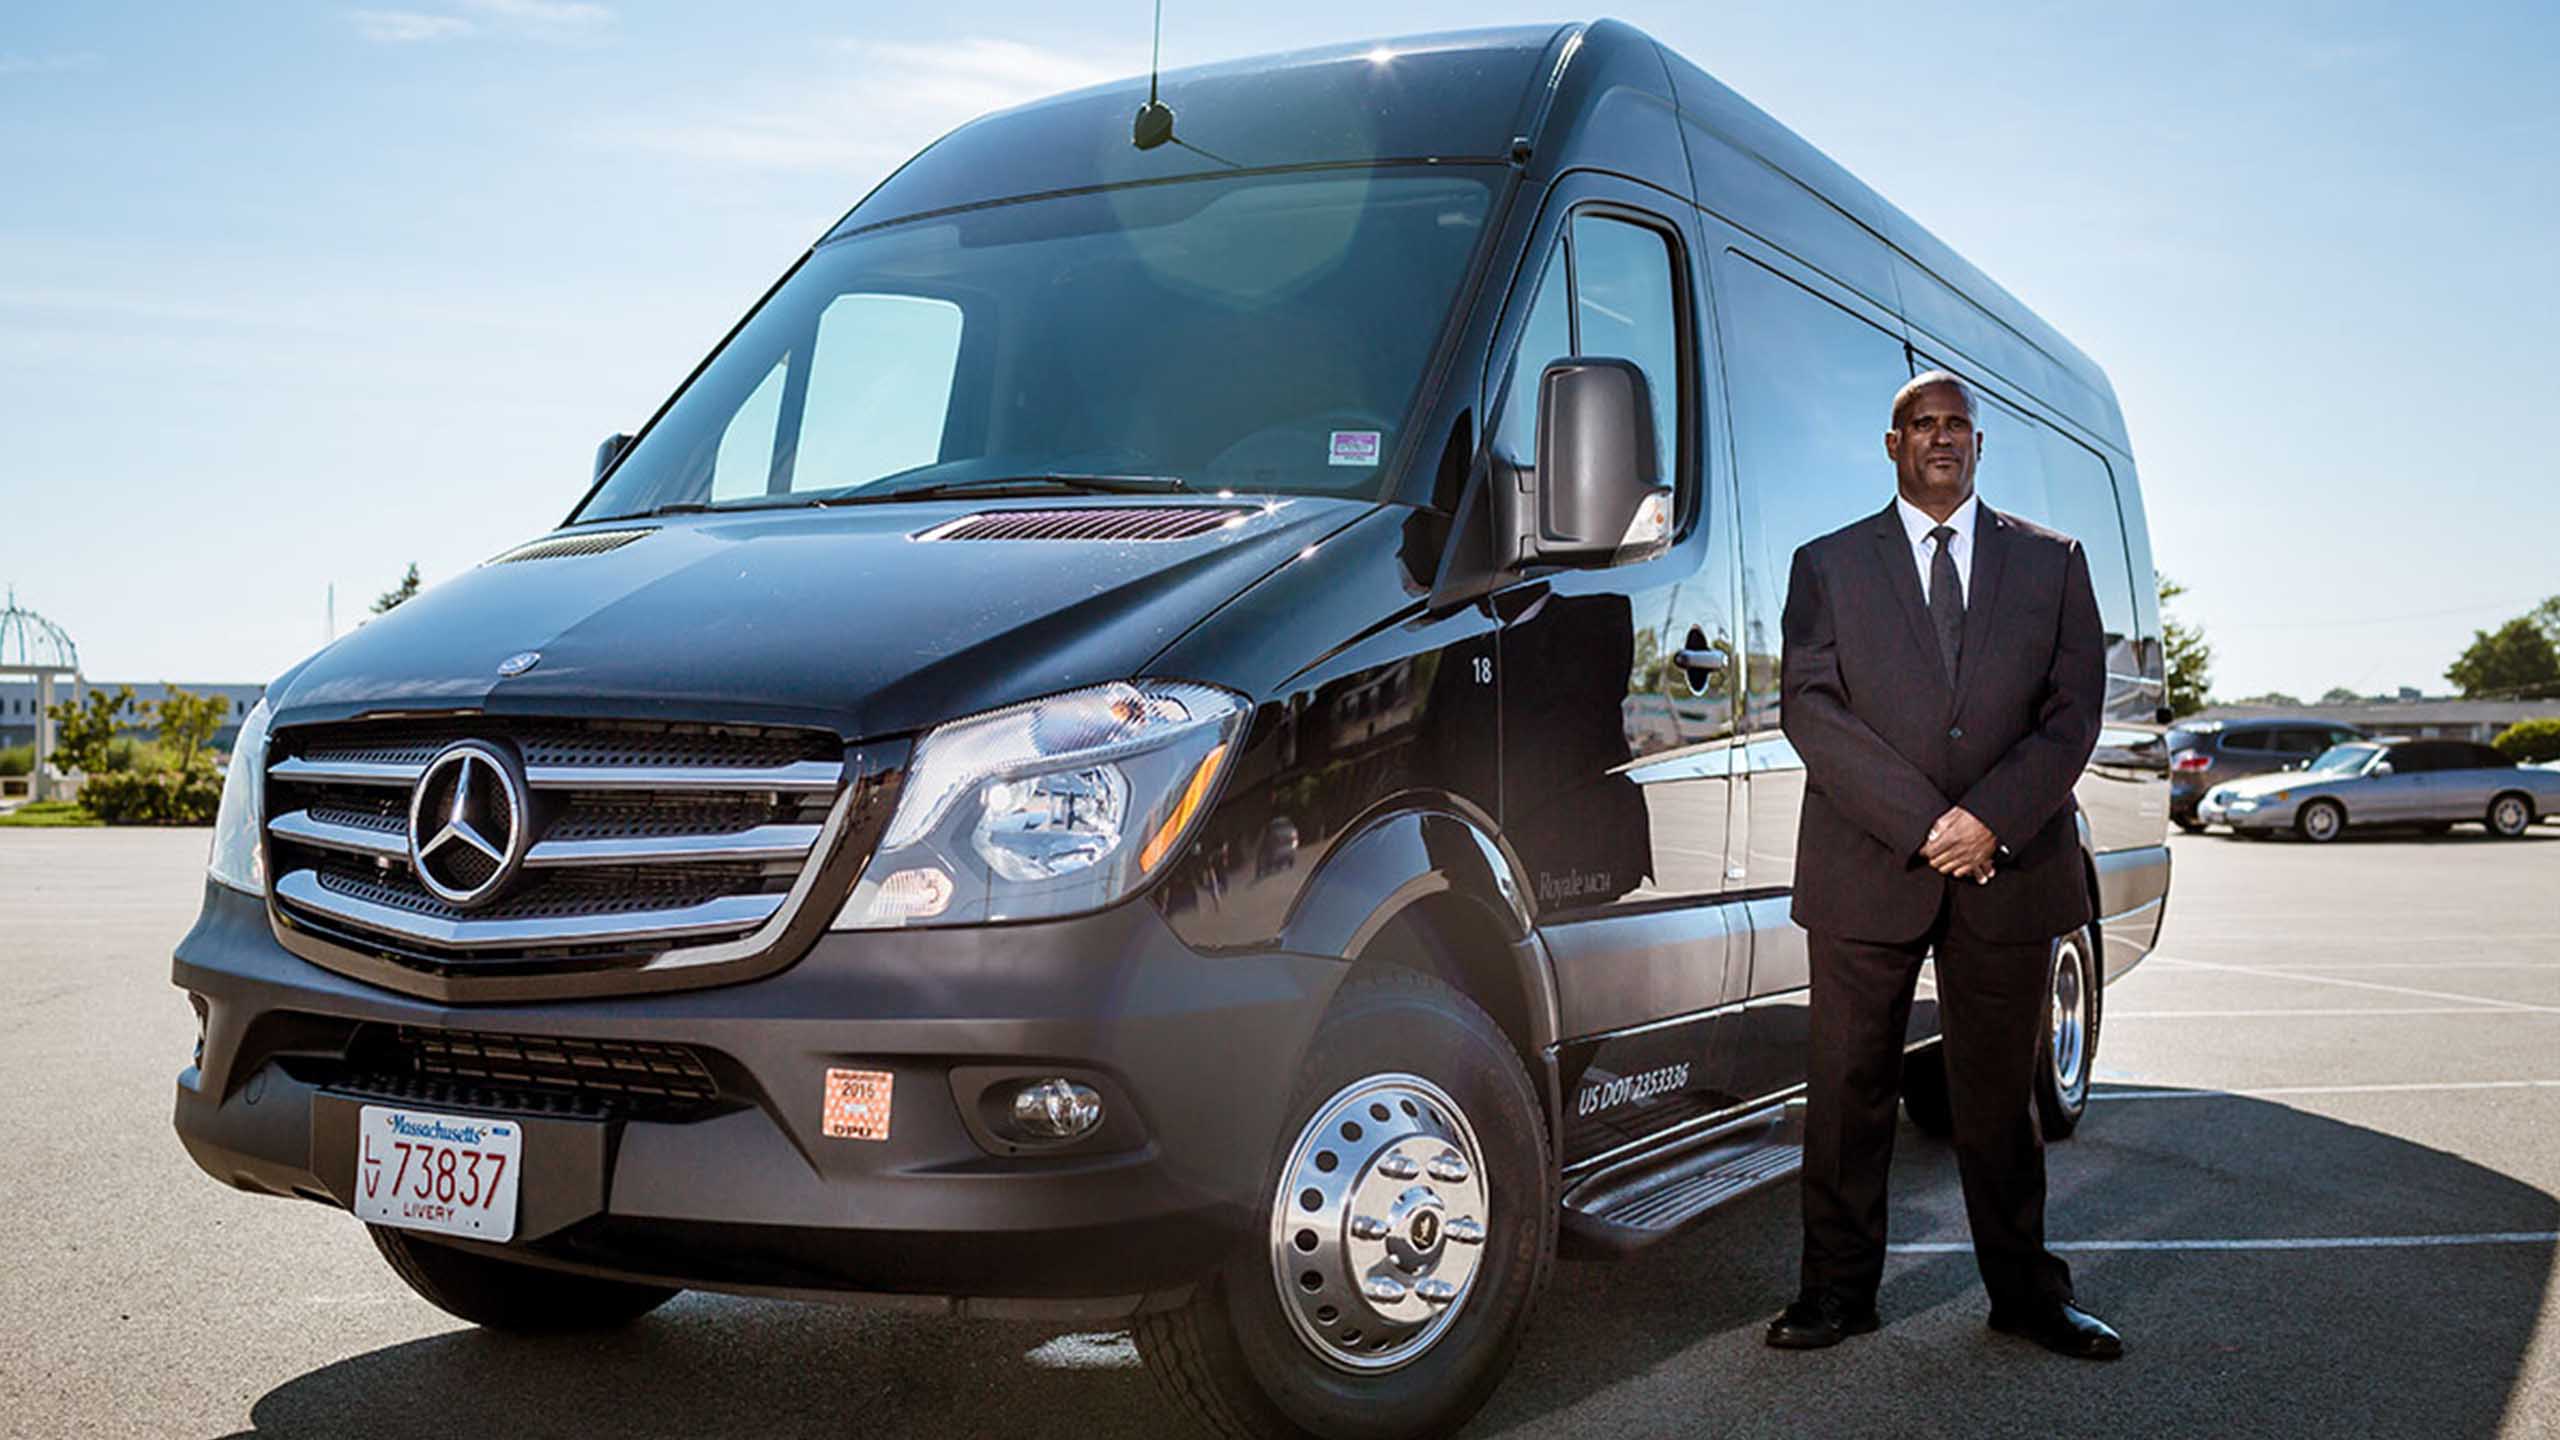 drvn's private shuttle service includes chauffeured Sprinter shuttle vans to accommodate groups up to 14.